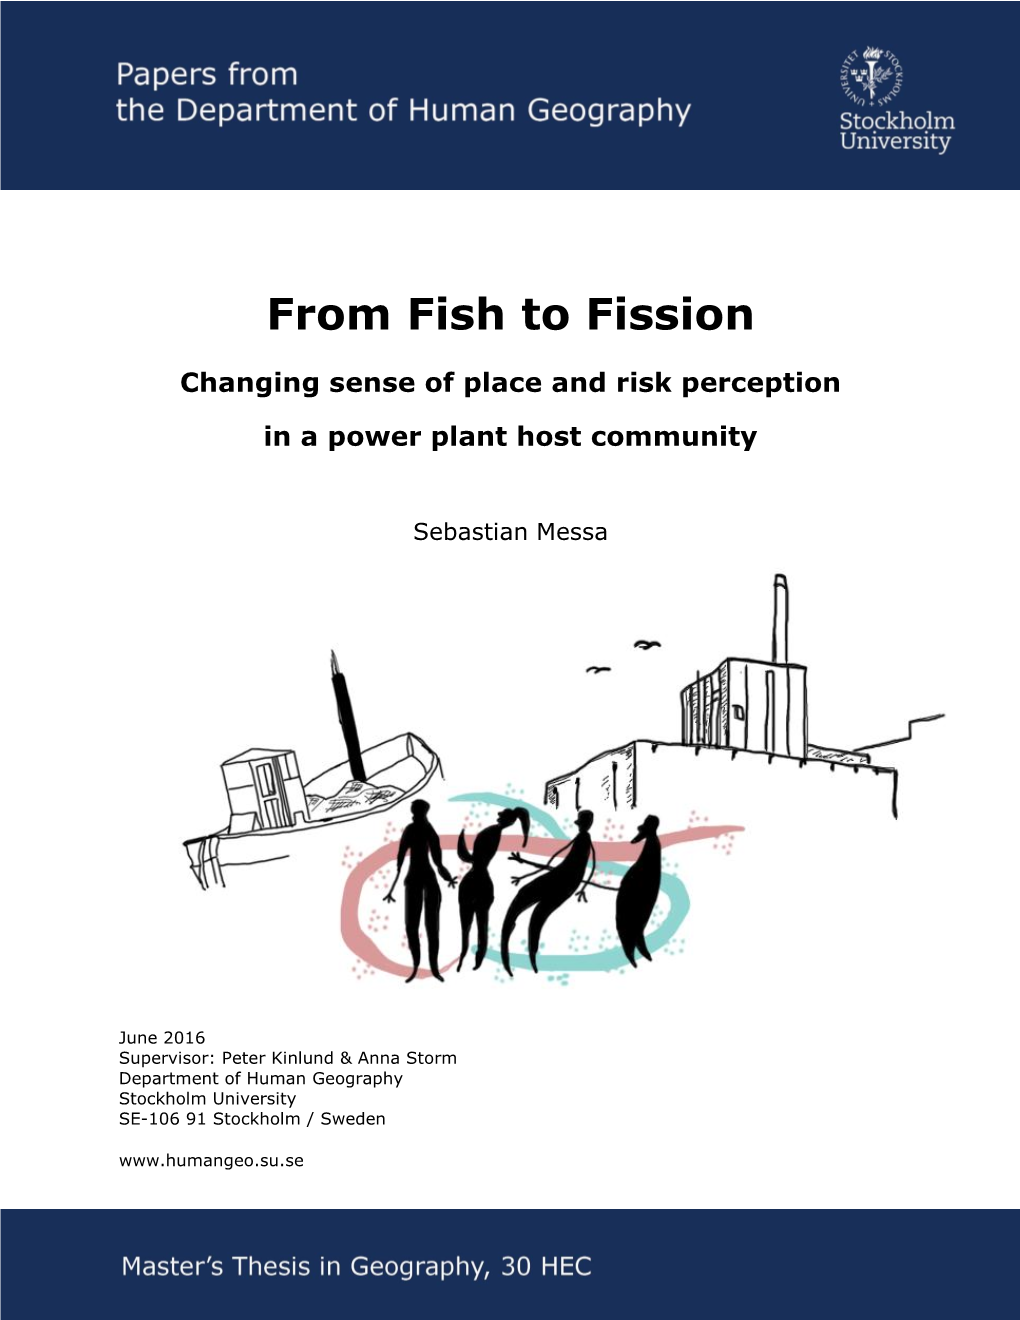 From Fish to Fission